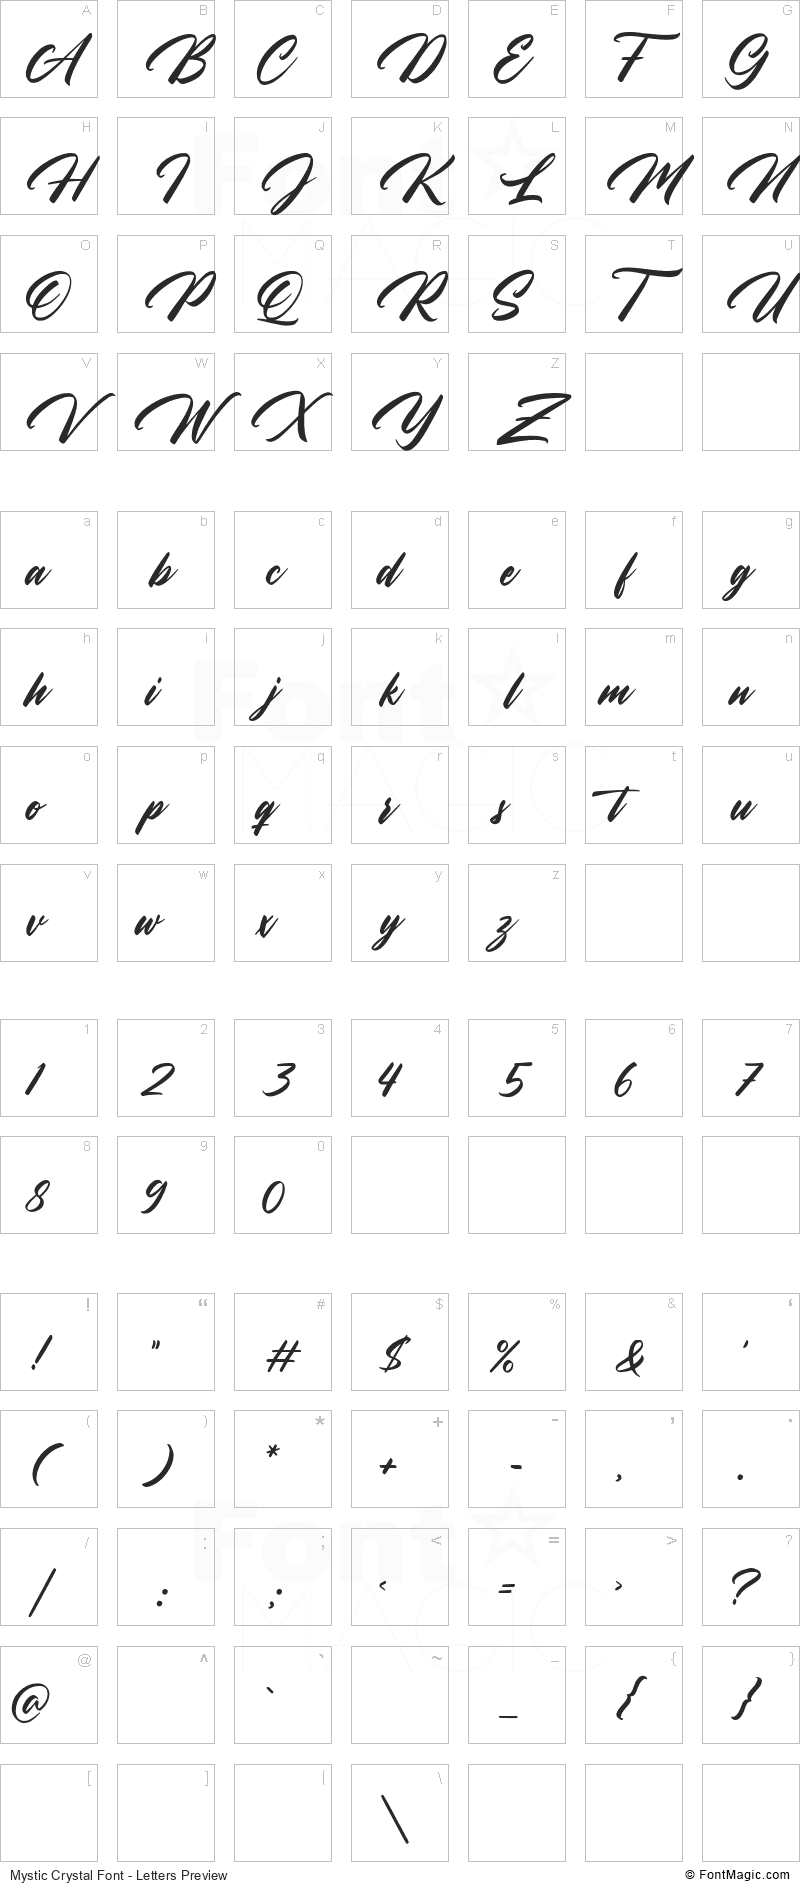 Mystic Crystal Font - All Latters Preview Chart